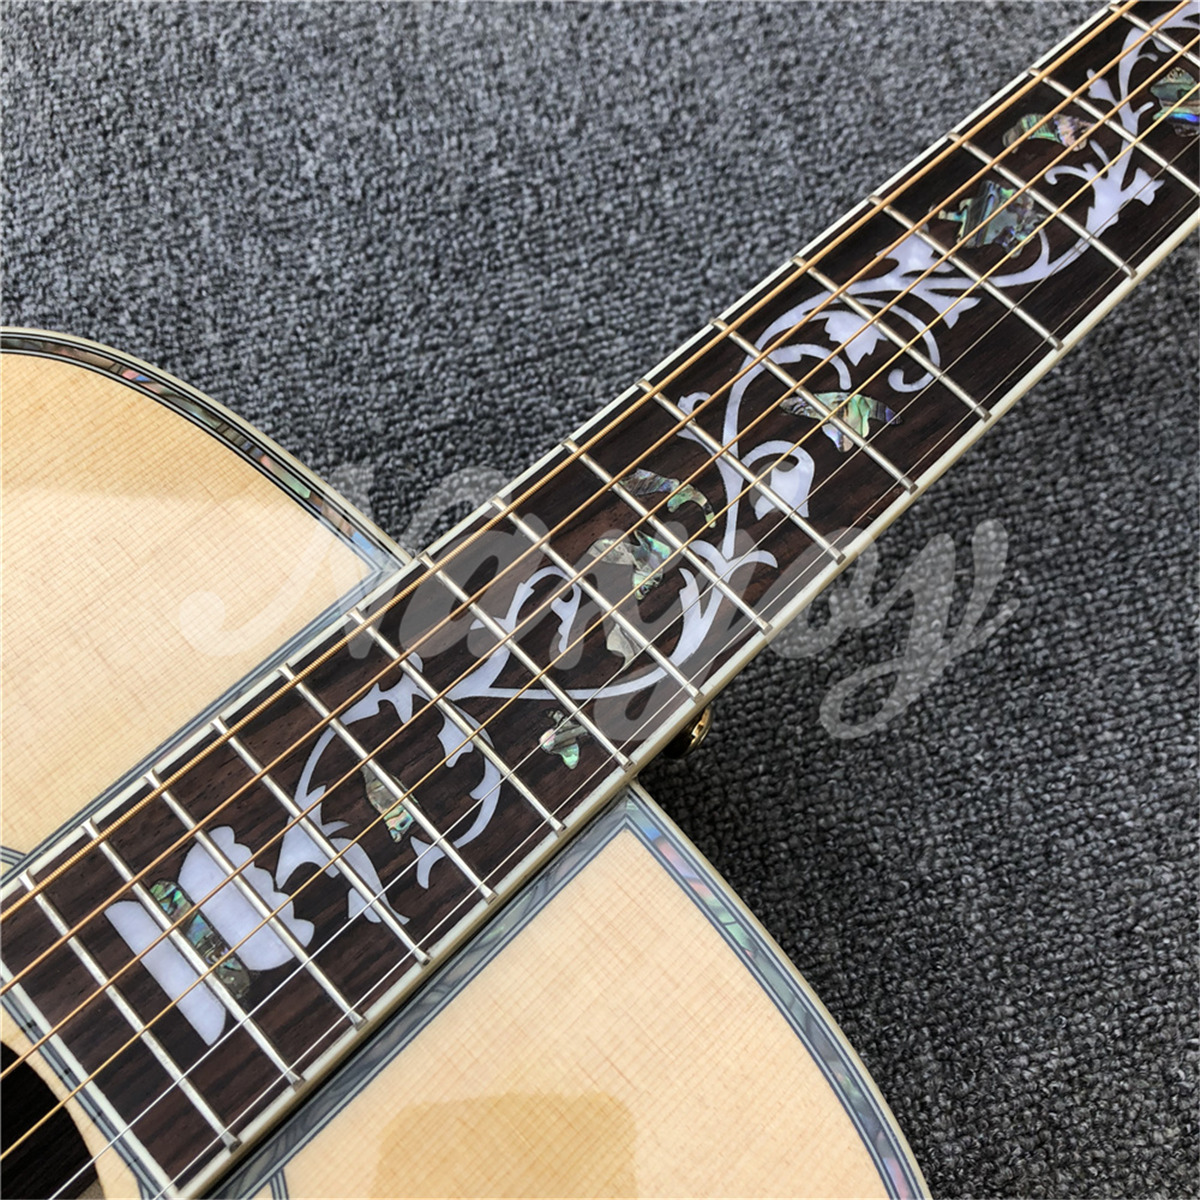 41 Inches D Type Solid Spruce Top Acoustic Guitar Abalone Tree of Life Inlays Rosewood Back and Sides Guitarra